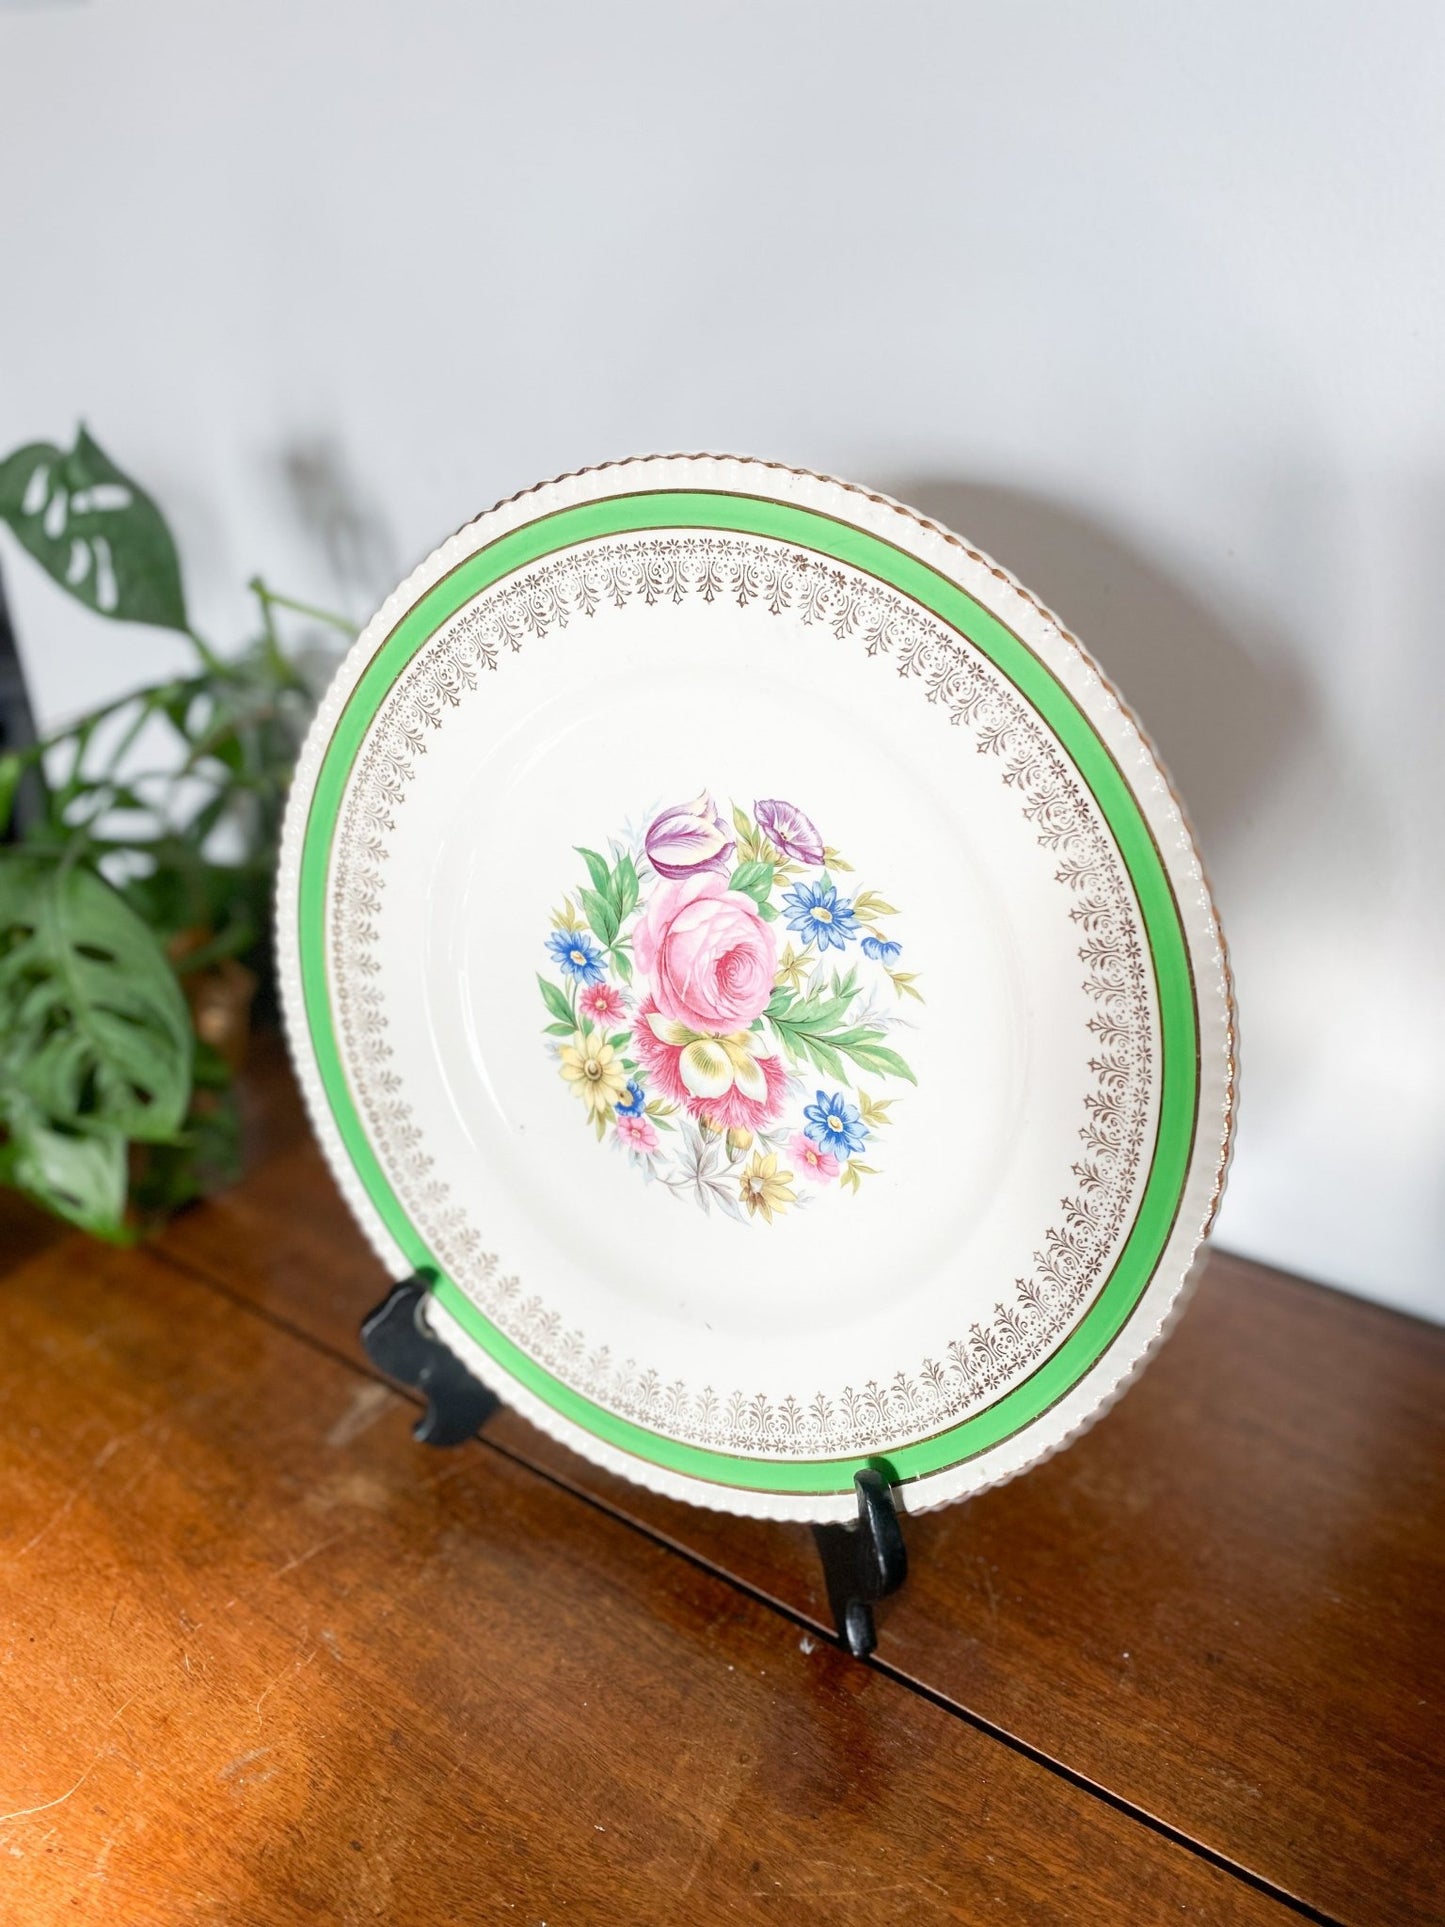 Solianware Simpsons Pottery - Green & Rose Plate with 22K Gold Filigre - Perth Market